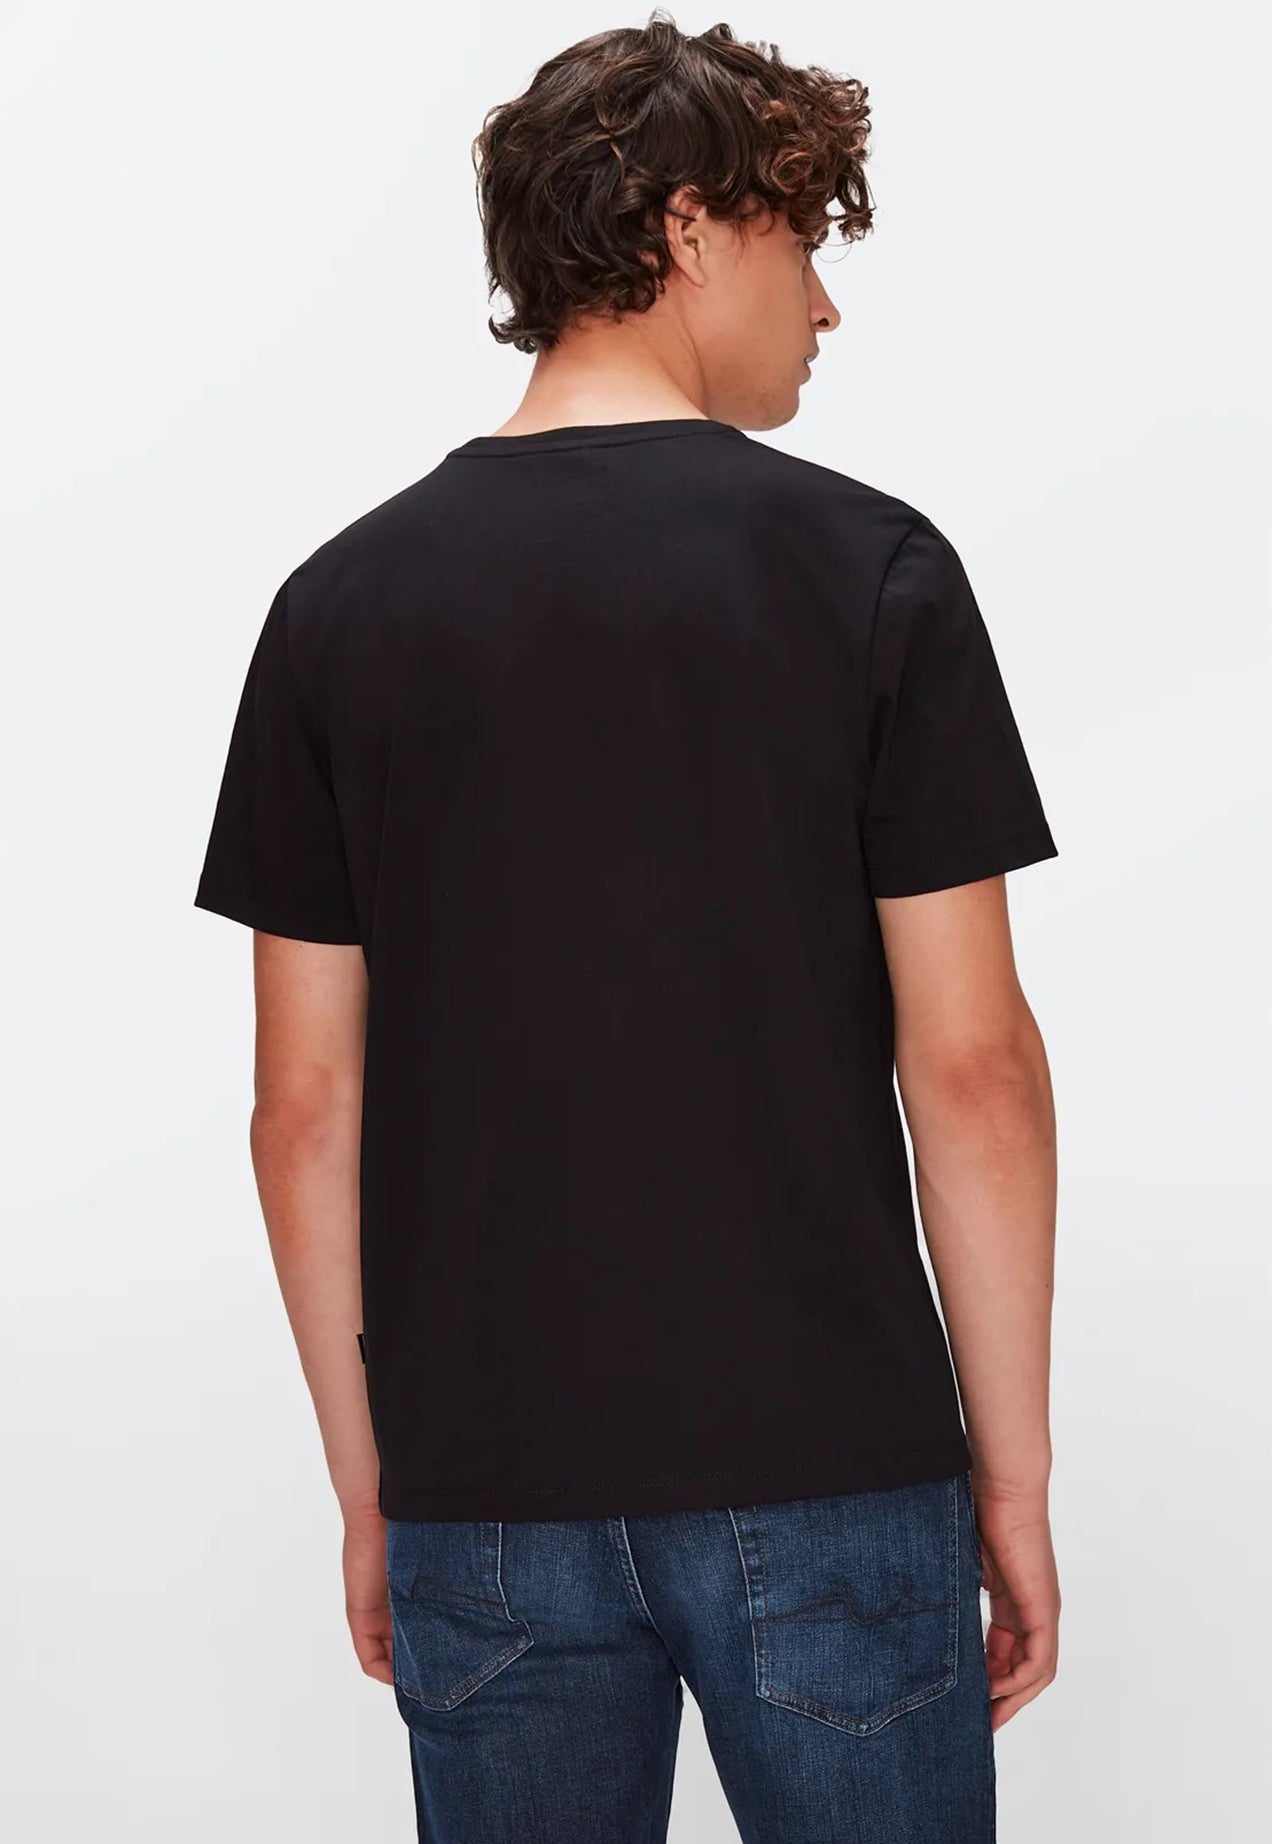 7 FOR ALL MANKIND - Black Photographic T-Shirt in Soft Cotton JSLM3320PB